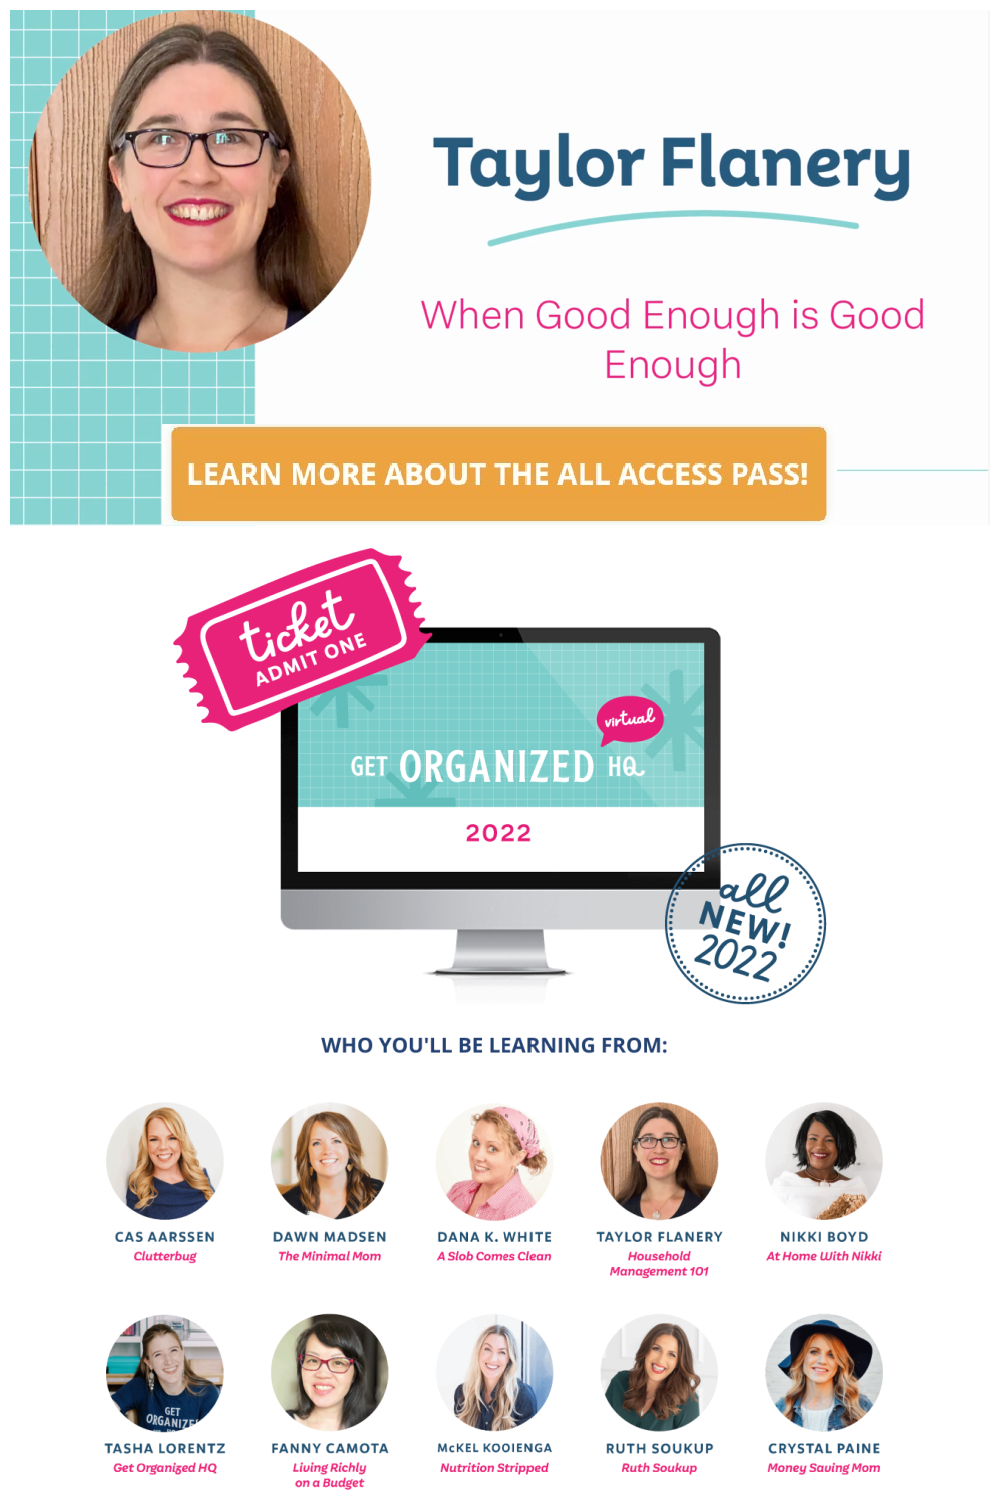 Are you ready to organize your life and streamline your home for good? If so, check out Get Organized HQ and get access to over 100 practical workshops for a stress-free home, including a workshop from me, Taylor!